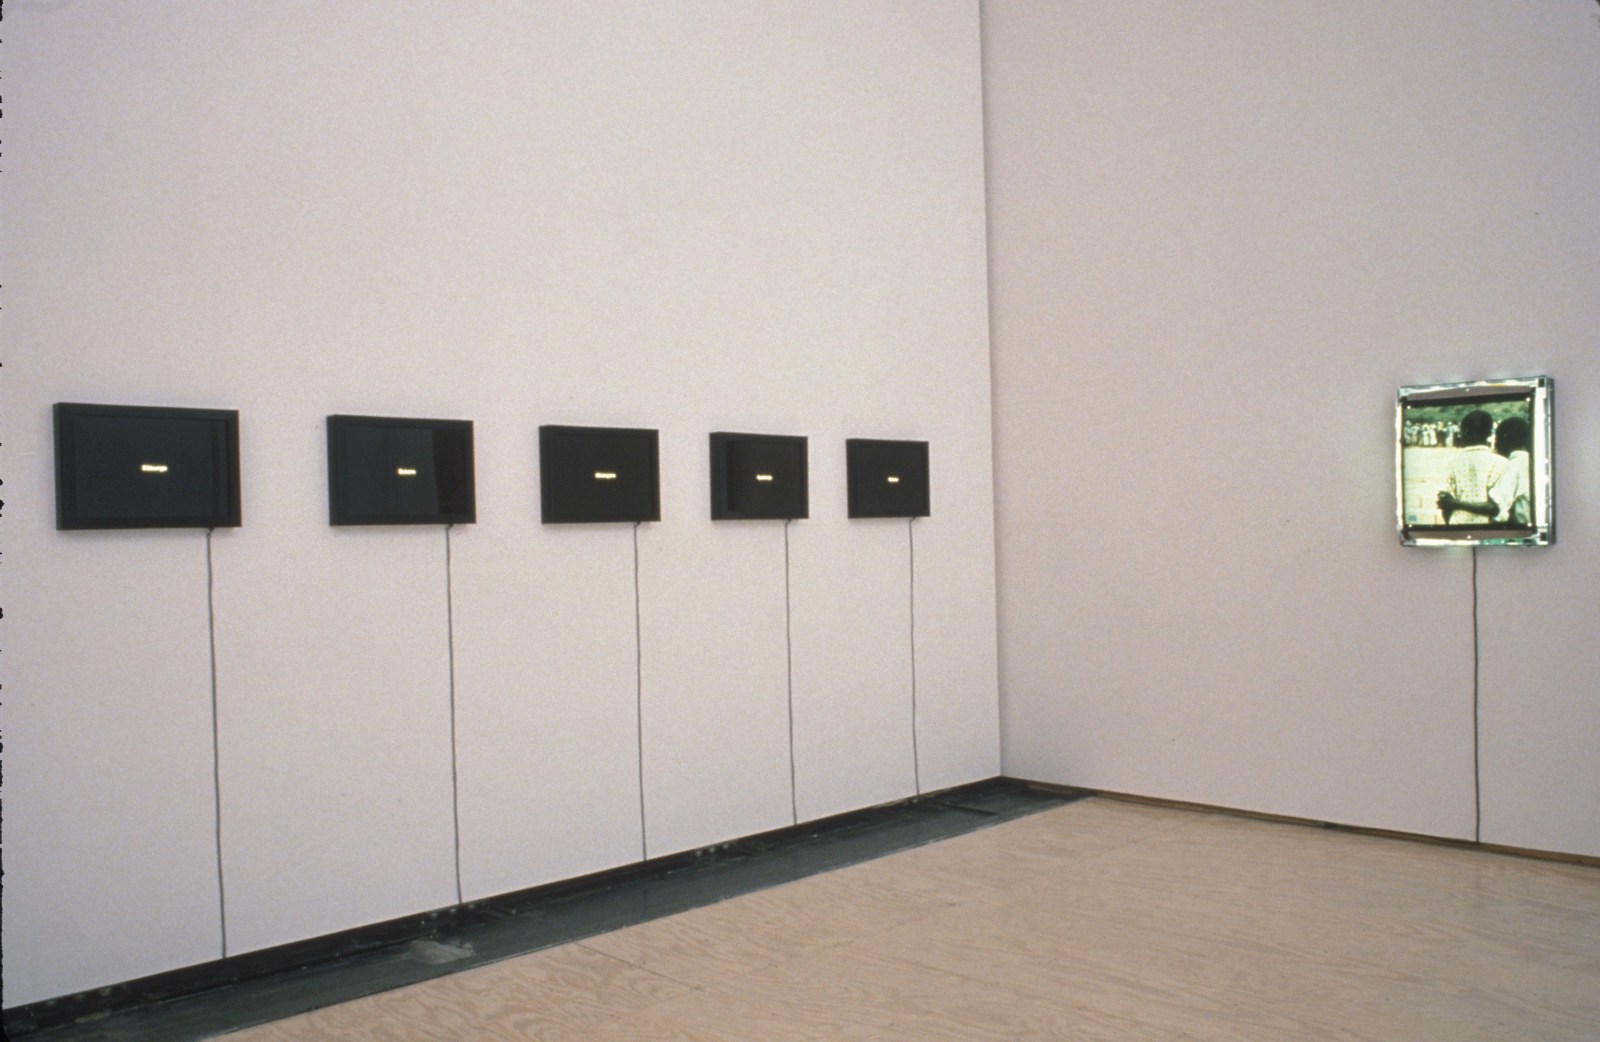 THE CRYSTAL STOPPER Curated by Carlos Basualdo installation view 2